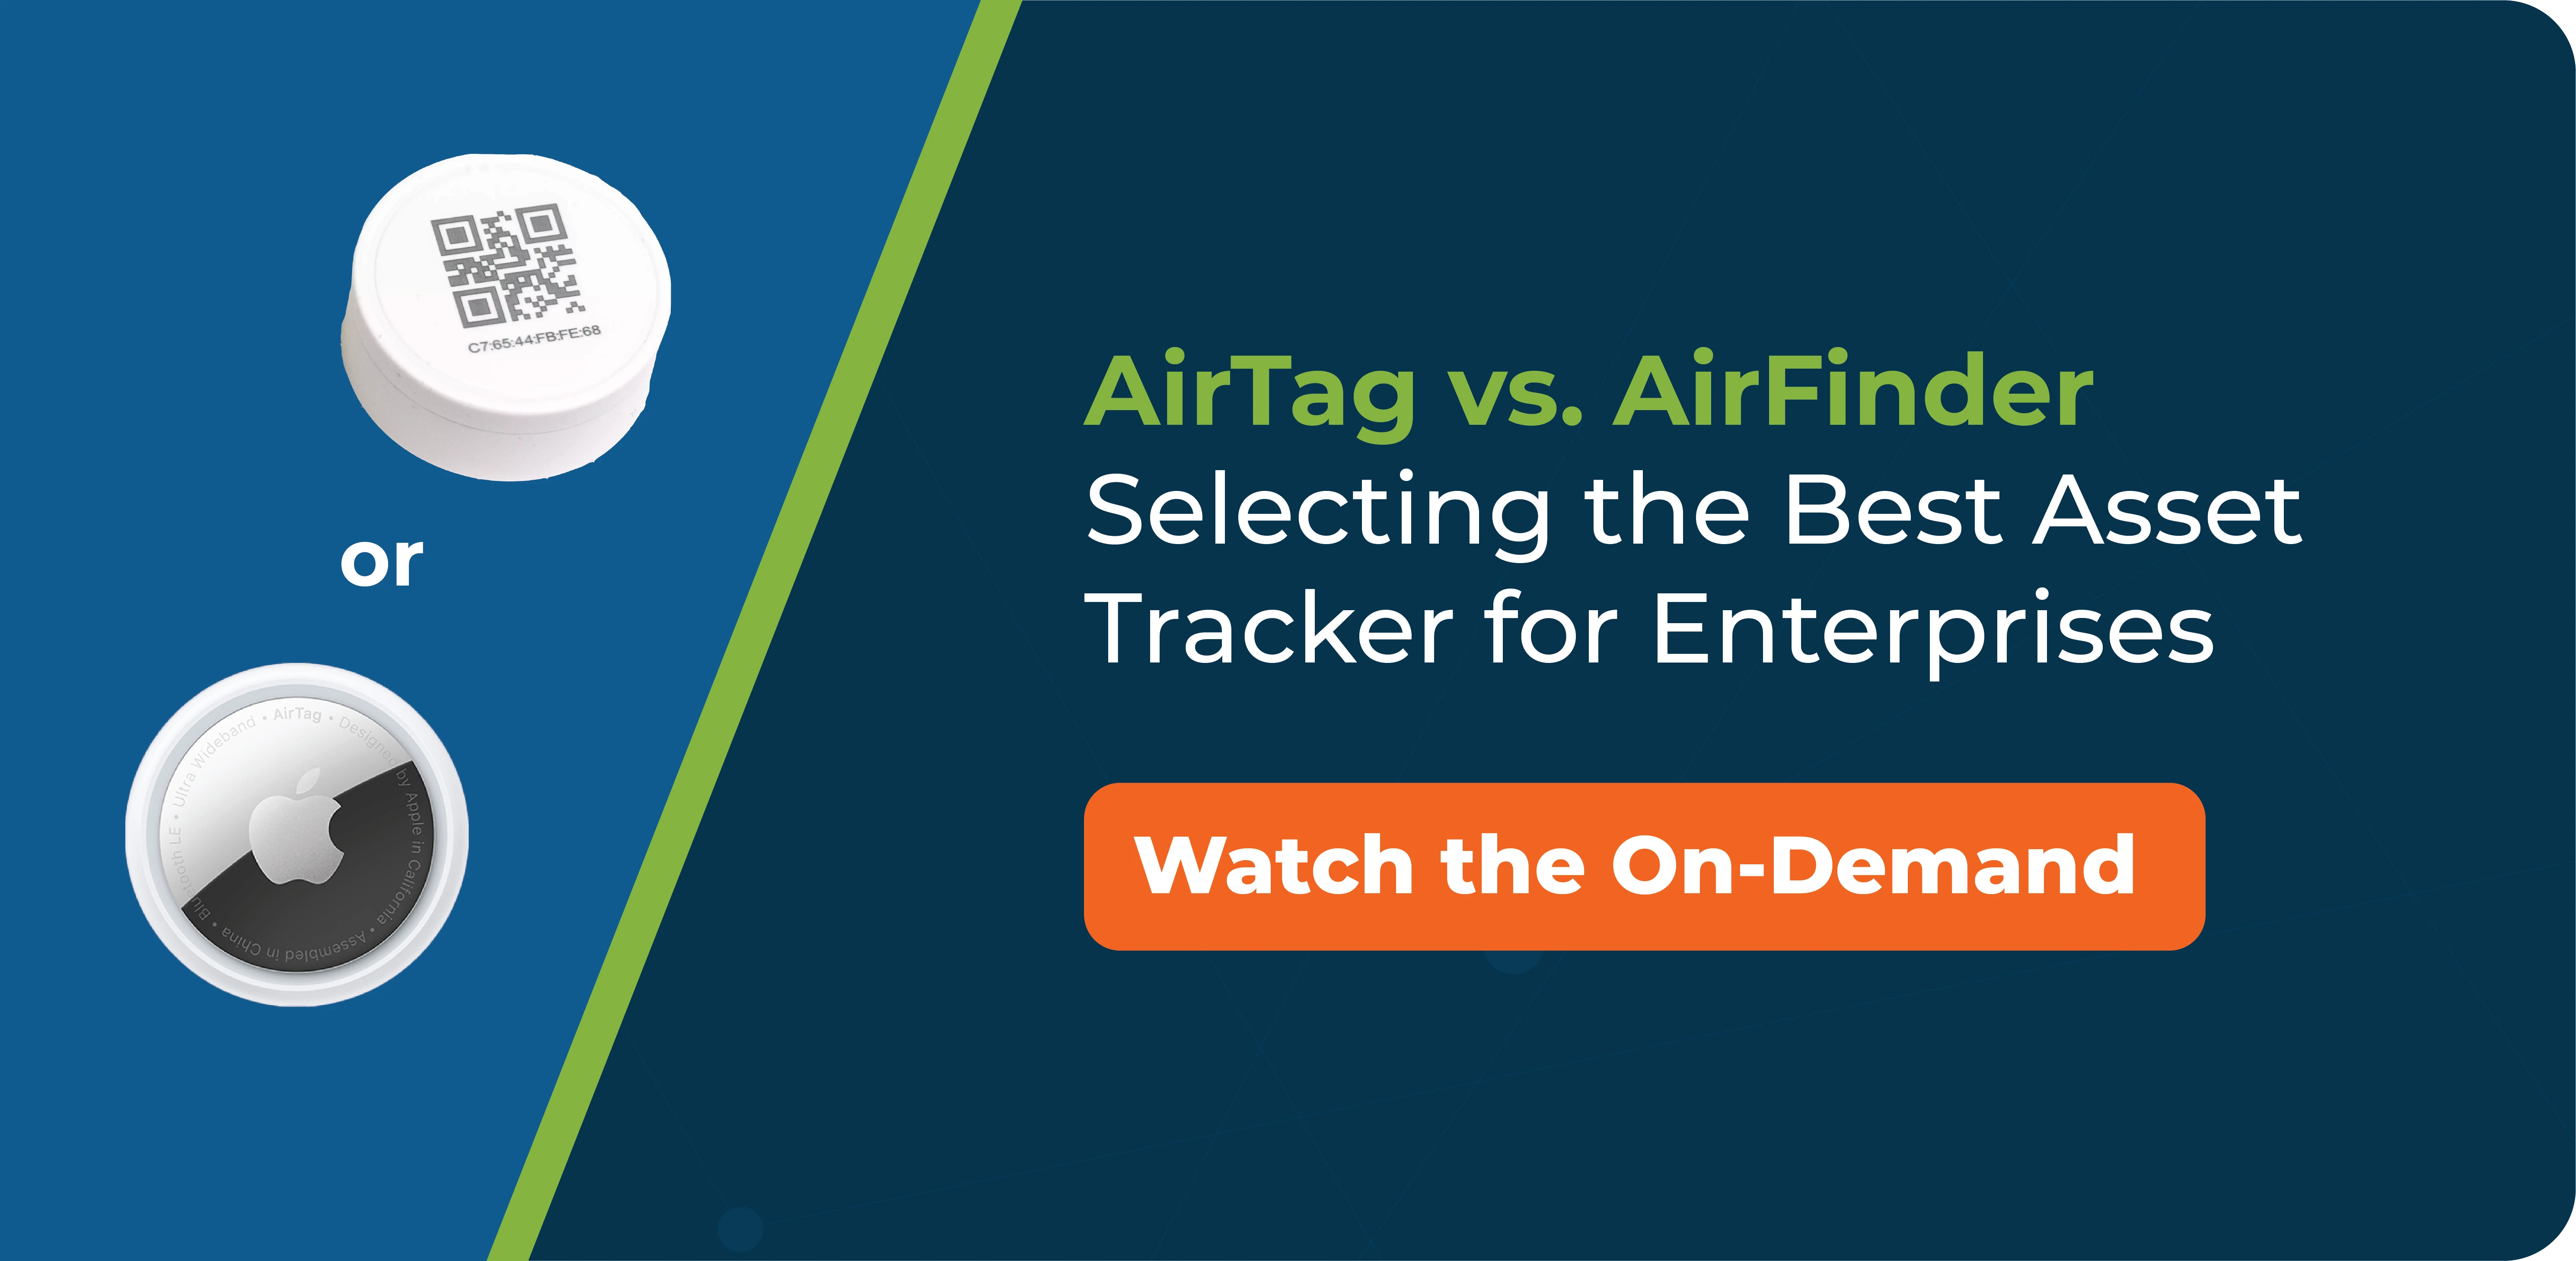 how does AirTag compare to AirFinder for enterprise companies?